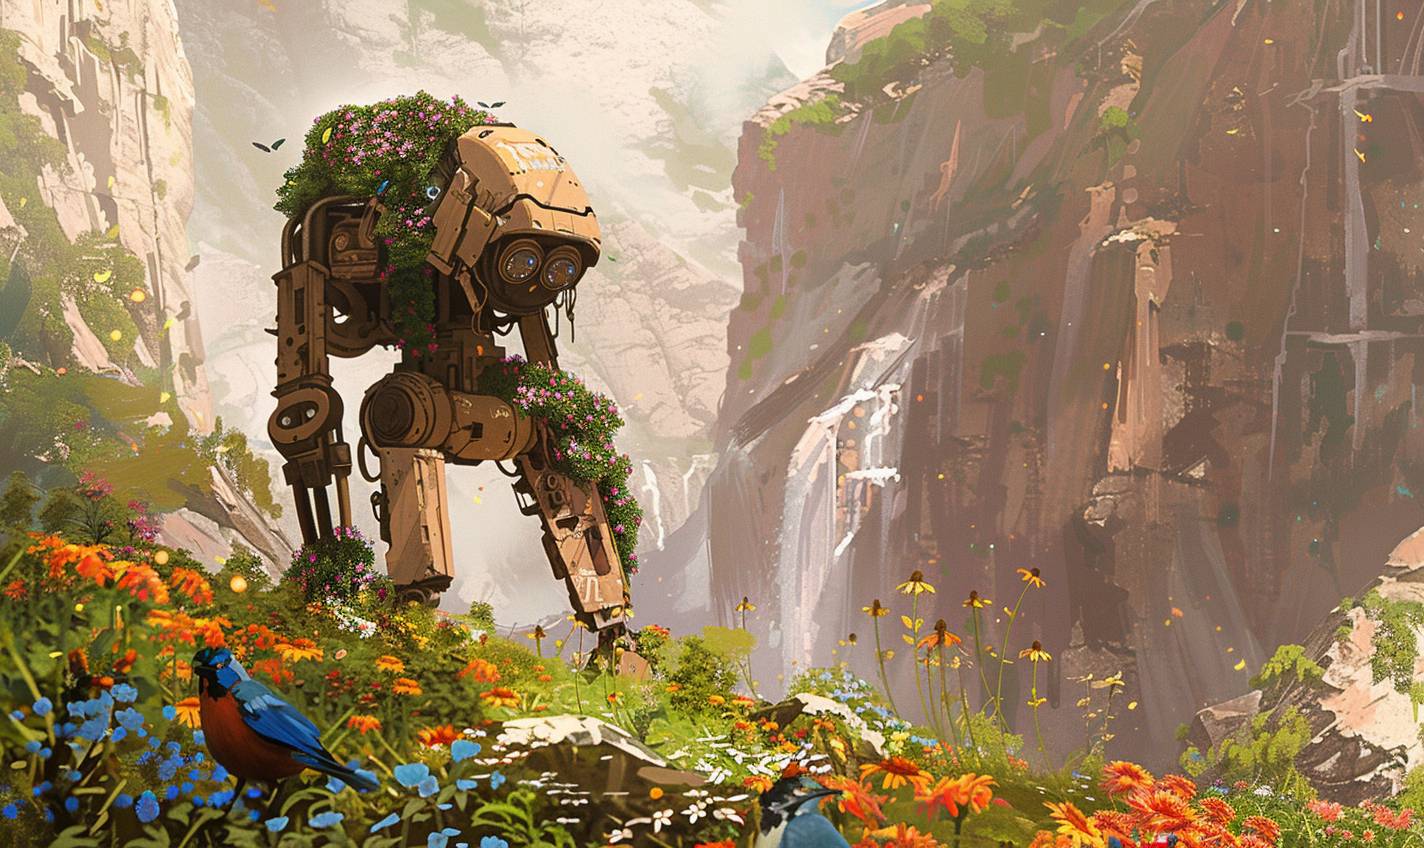 A weathered, wooden mech robot covered in flowering vines stands peacefully in a field of tall wildflowers, with a small bluebird resting on its outstretched hand. Digital cartoon, with warm colors and soft lines. A large cliff with a waterfall looms behind